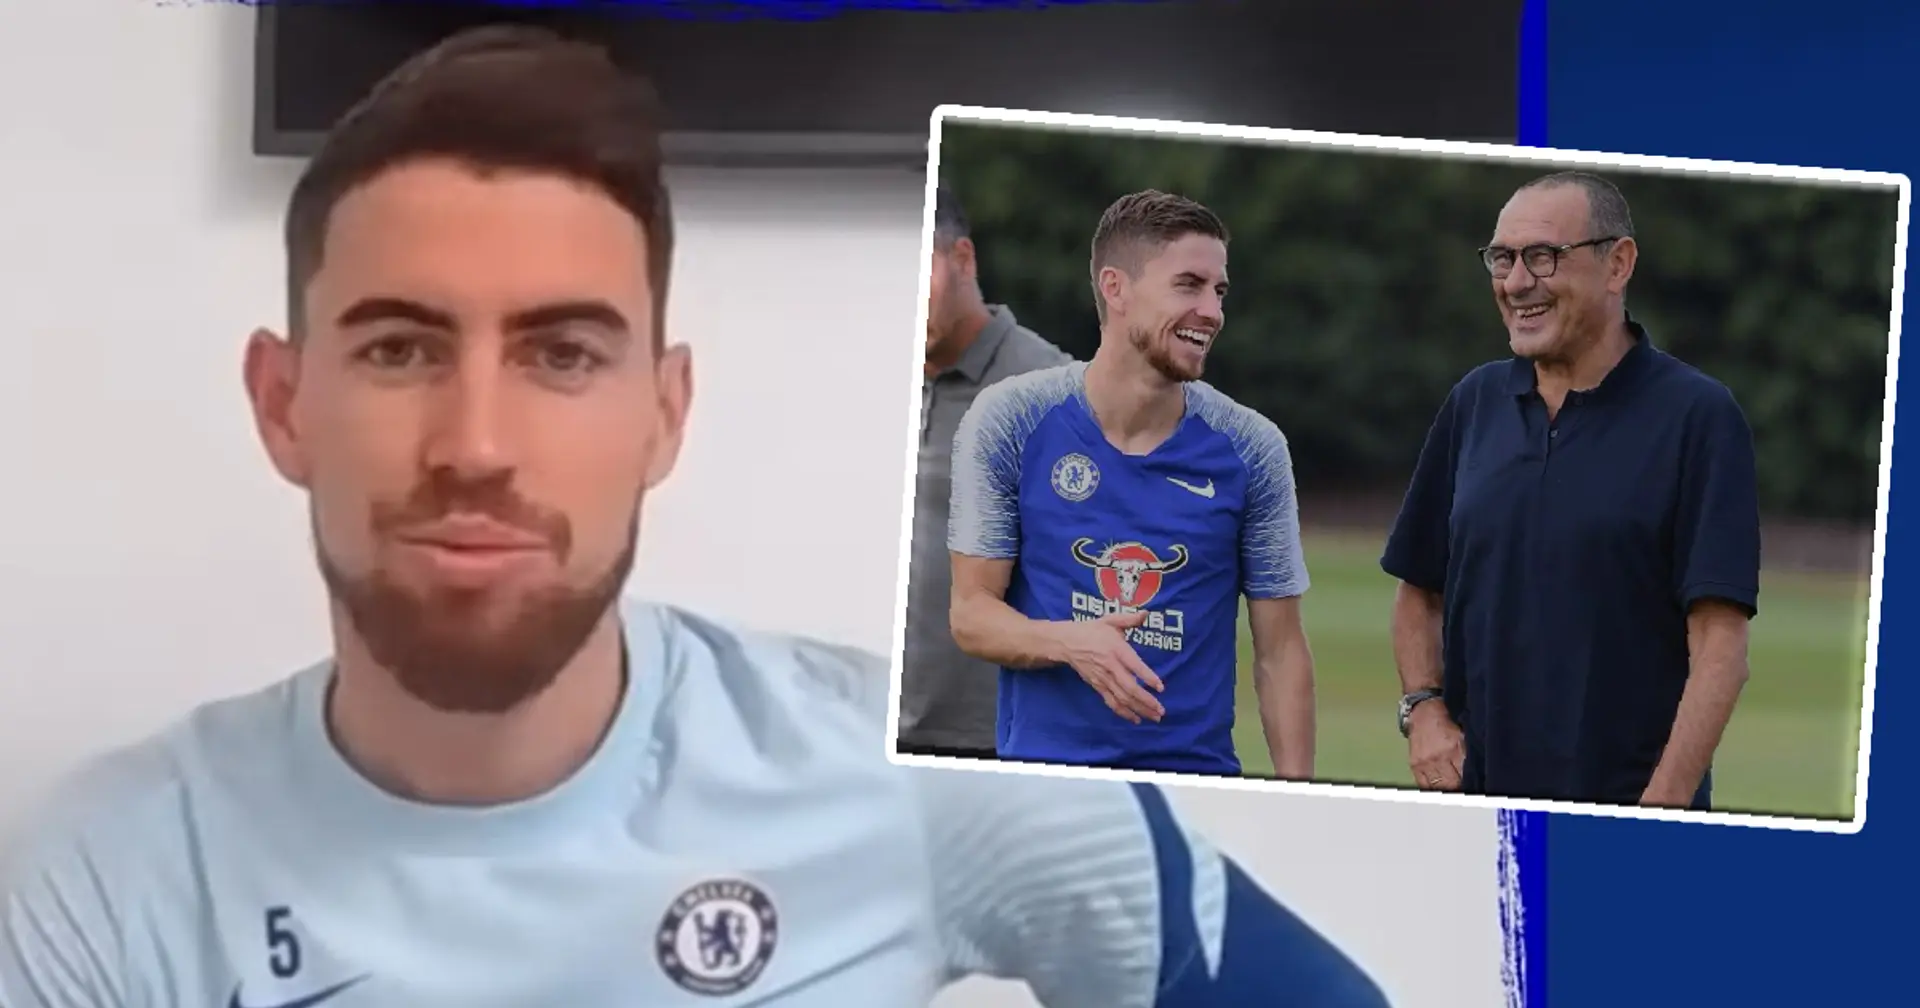 'These people are going to be embarrassed': Jorginho sends message to fans calling him 'Sarri's son'